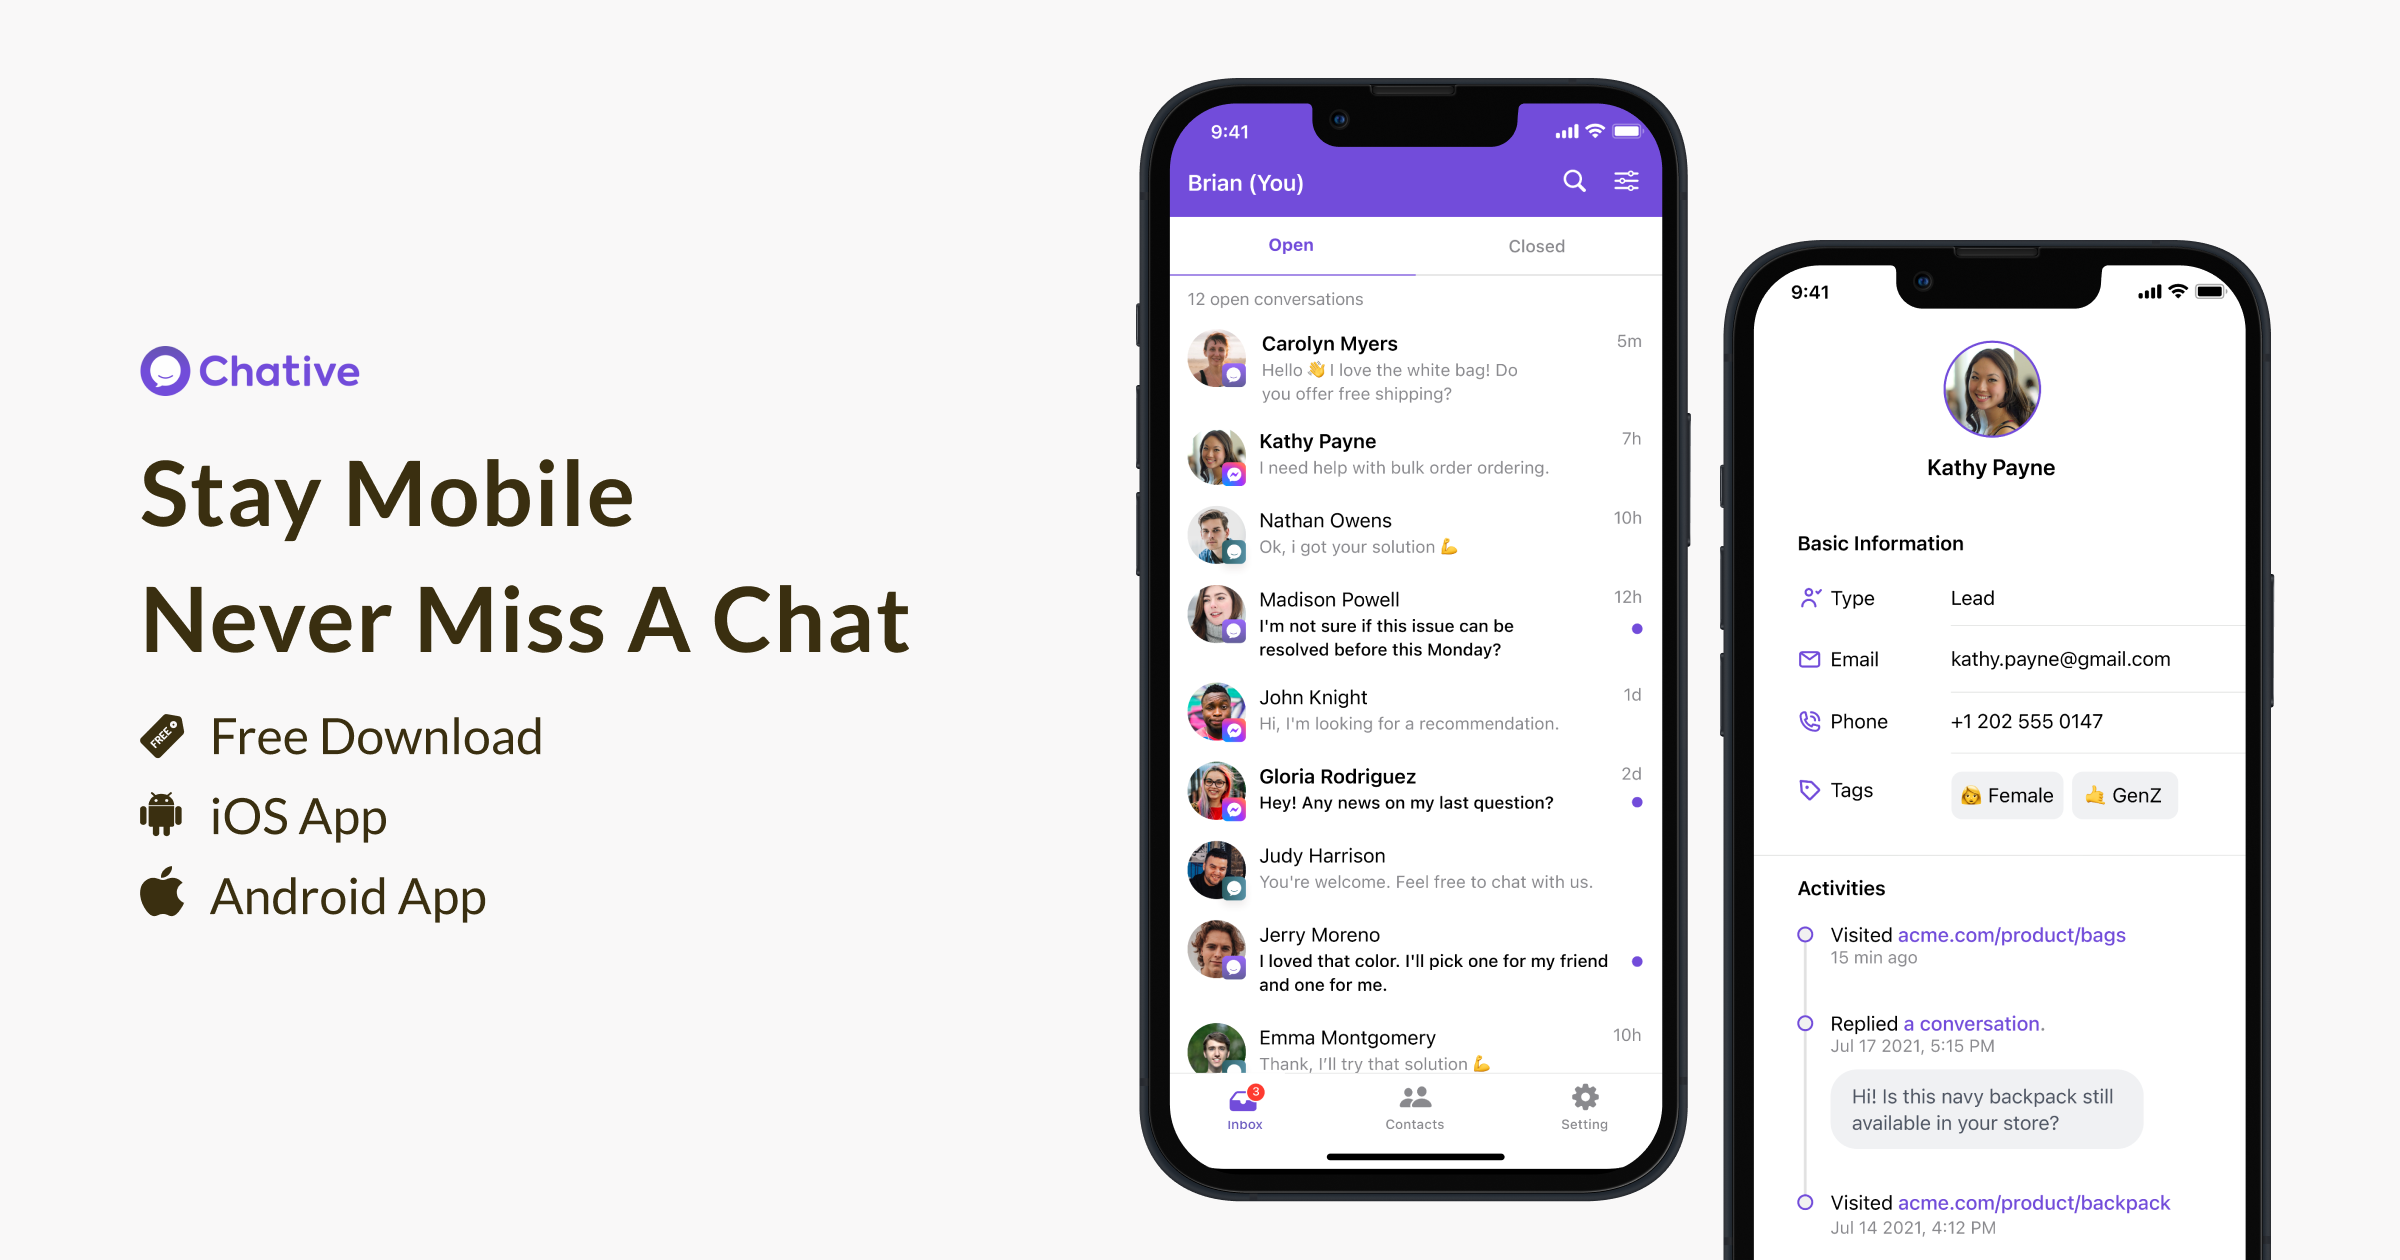 With the Chative.IO mobile app, you can stay connected with your customers and provide exceptional support even while on the go.